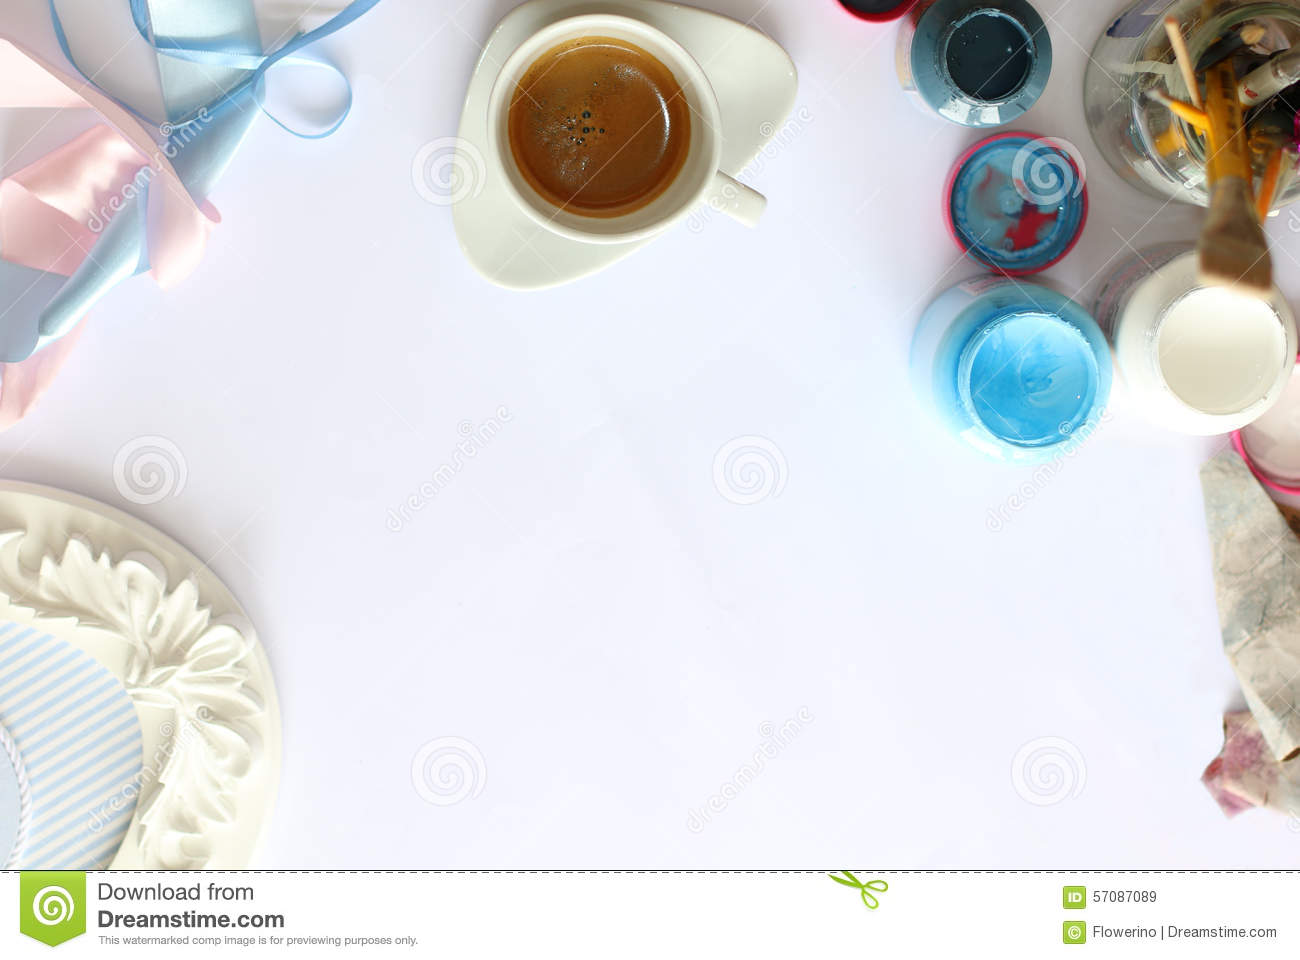 Coffee Espresso In White Cup Ribbons Paintbrushes Open Containers